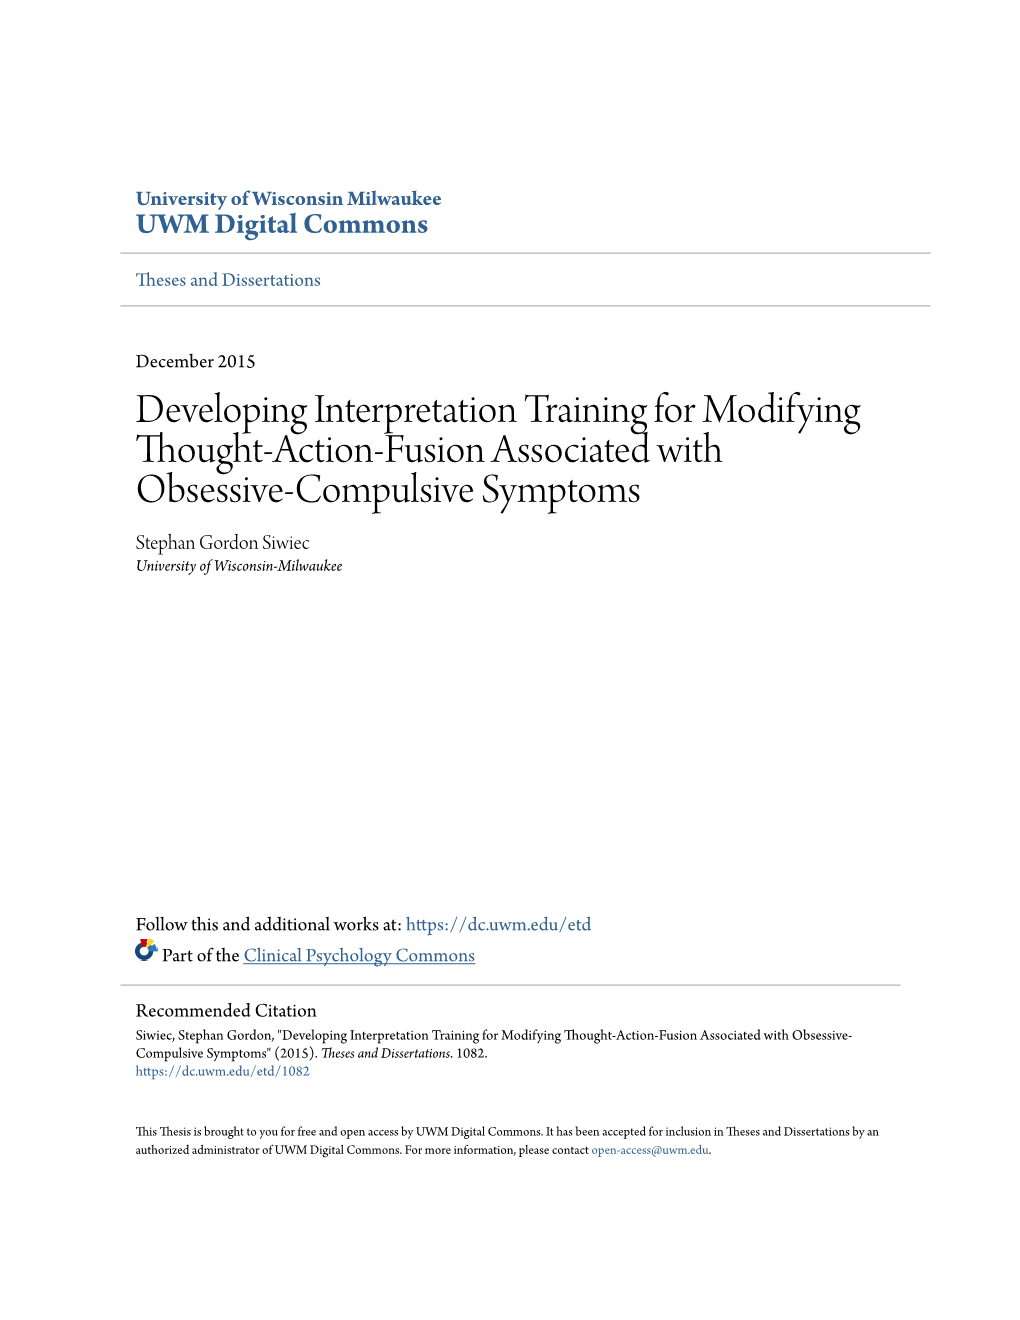 Developing Interpretation Training for Modifying Thought-Action-Fusion Associated with Obsessive-Compulsive Symptoms